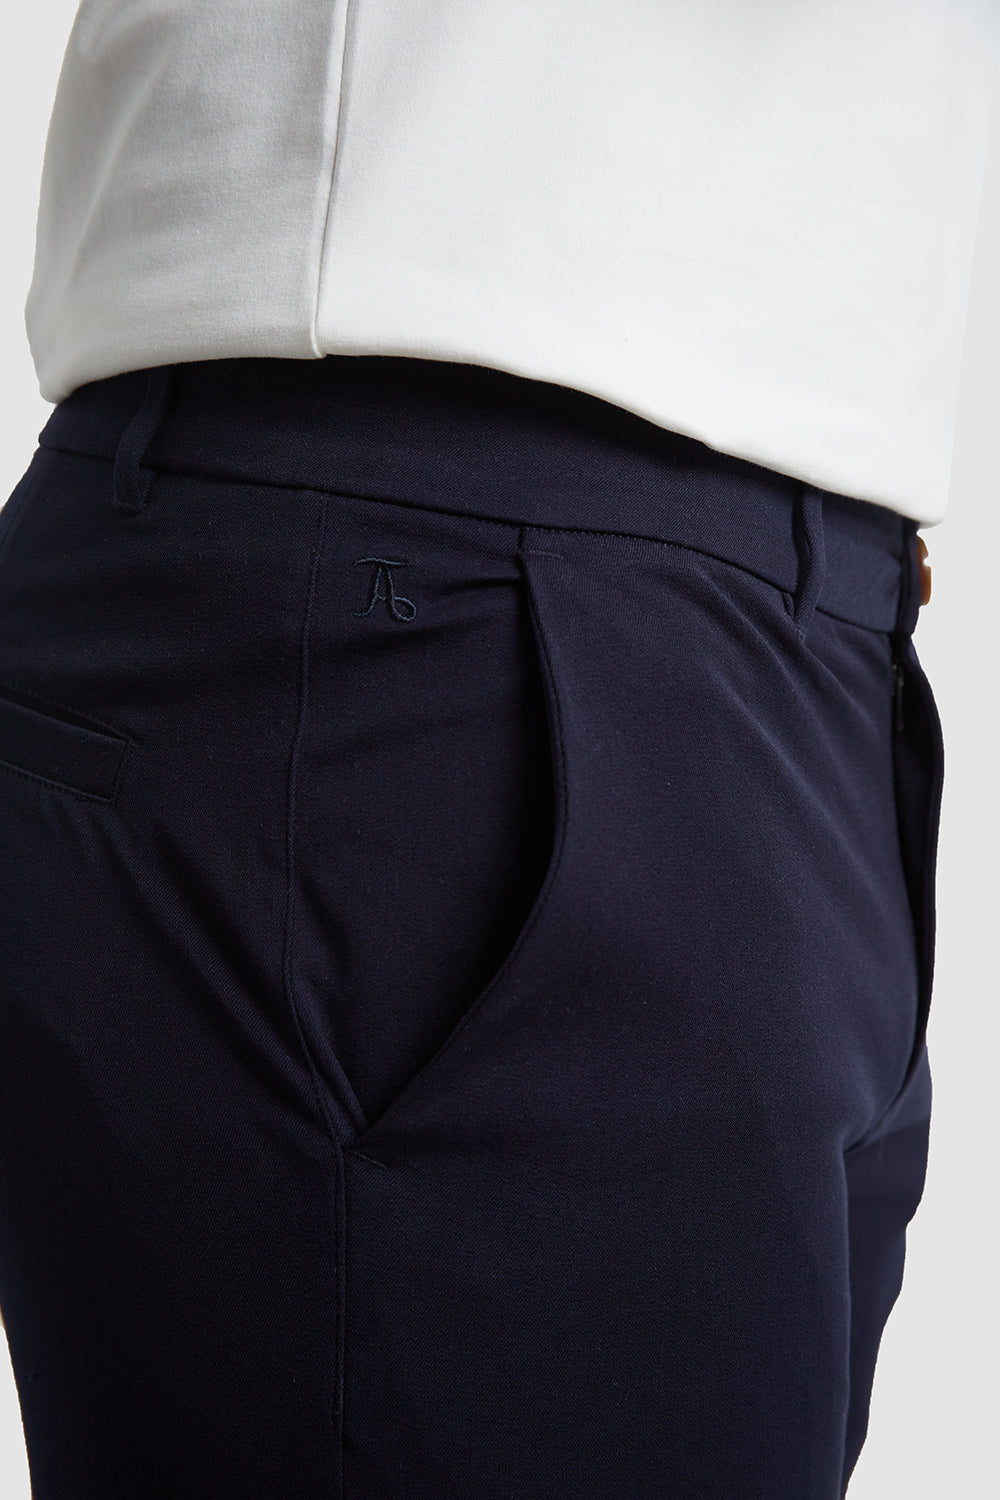 Athletic Fit Chino Shorts - - ATHLETE Navy in USA TAILORED